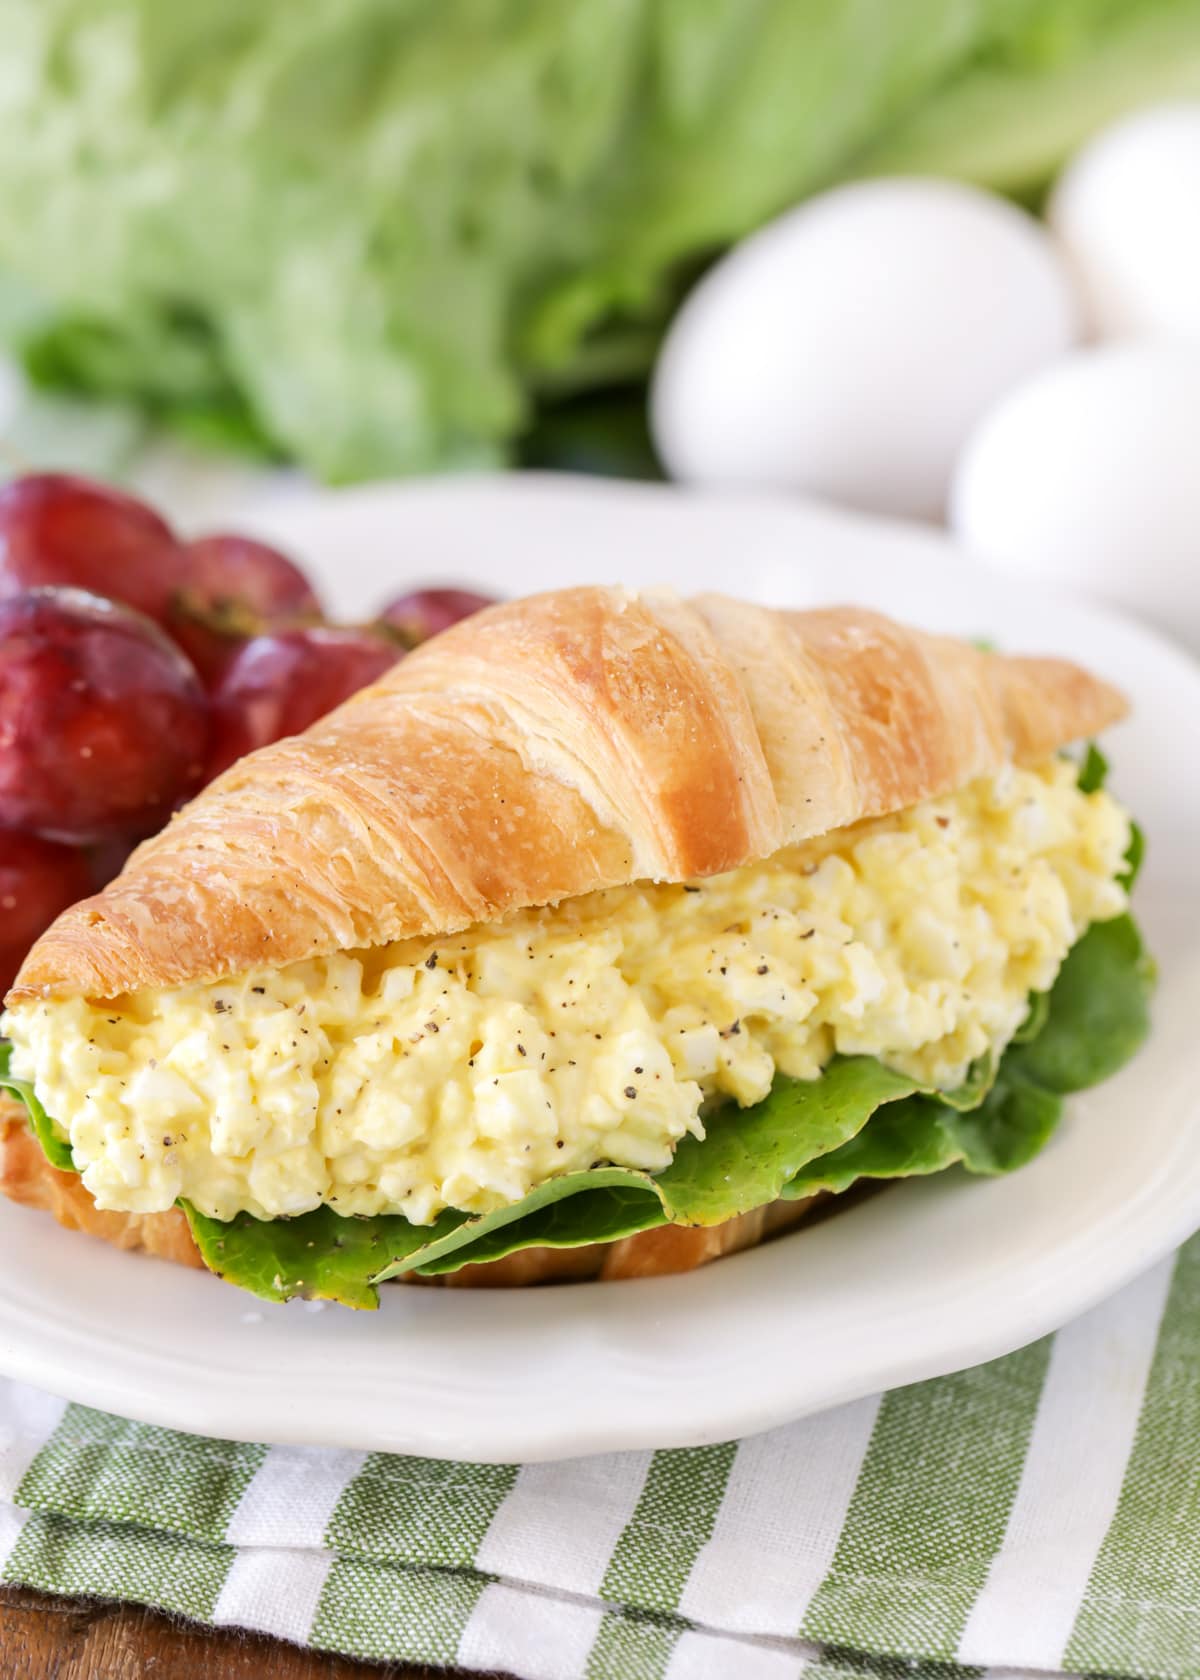 How to make egg salad served on a croissant with grapes.